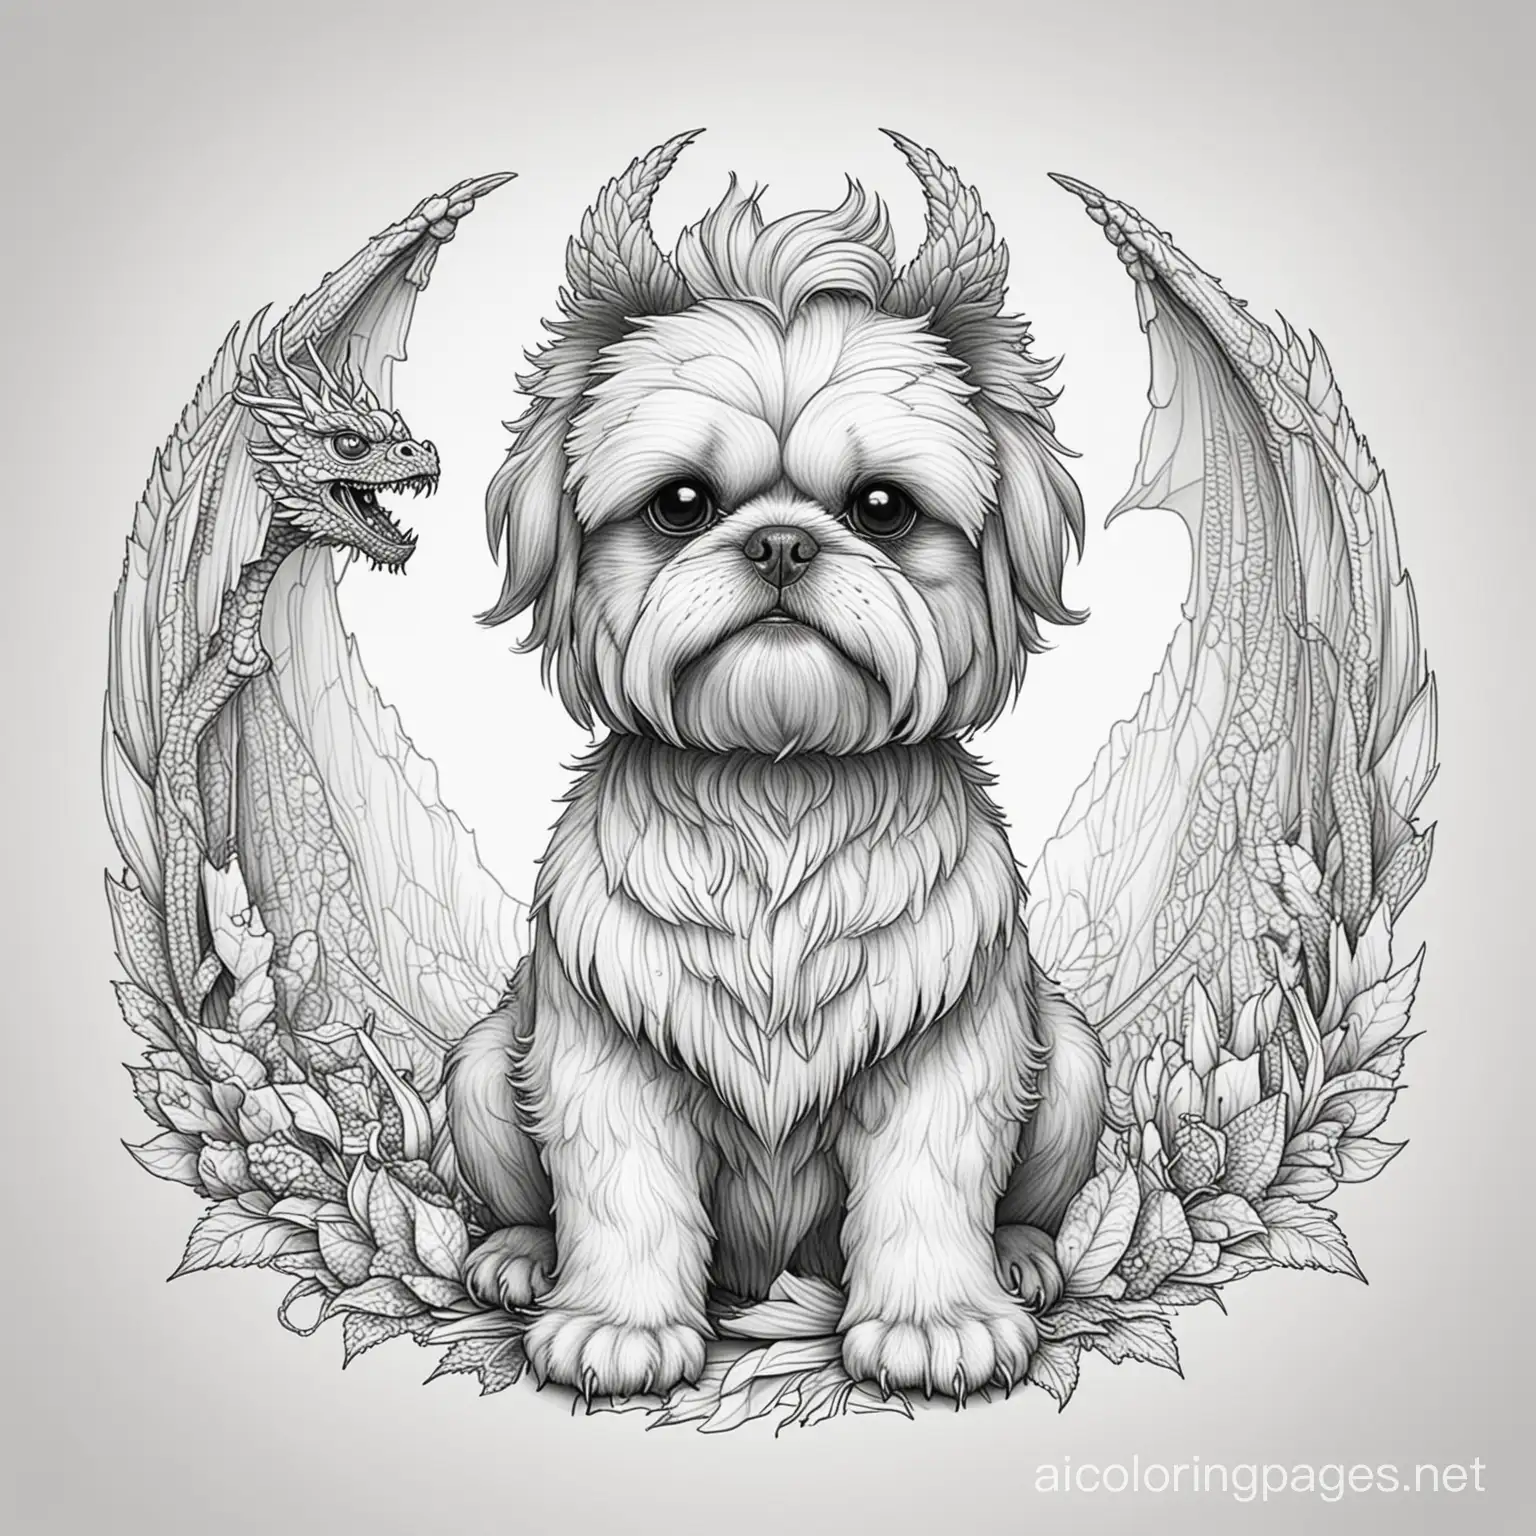 A mythical creature with the head of a Shih Tzu and the body of a dragon, Coloring Page, black and white, line art, white background, Simplicity, Ample White Space. The background of the coloring page is plain white to make it easy for young children to color within the lines. The outlines of all the subjects are easy to distinguish, making it simple for kids to color without too much difficulty